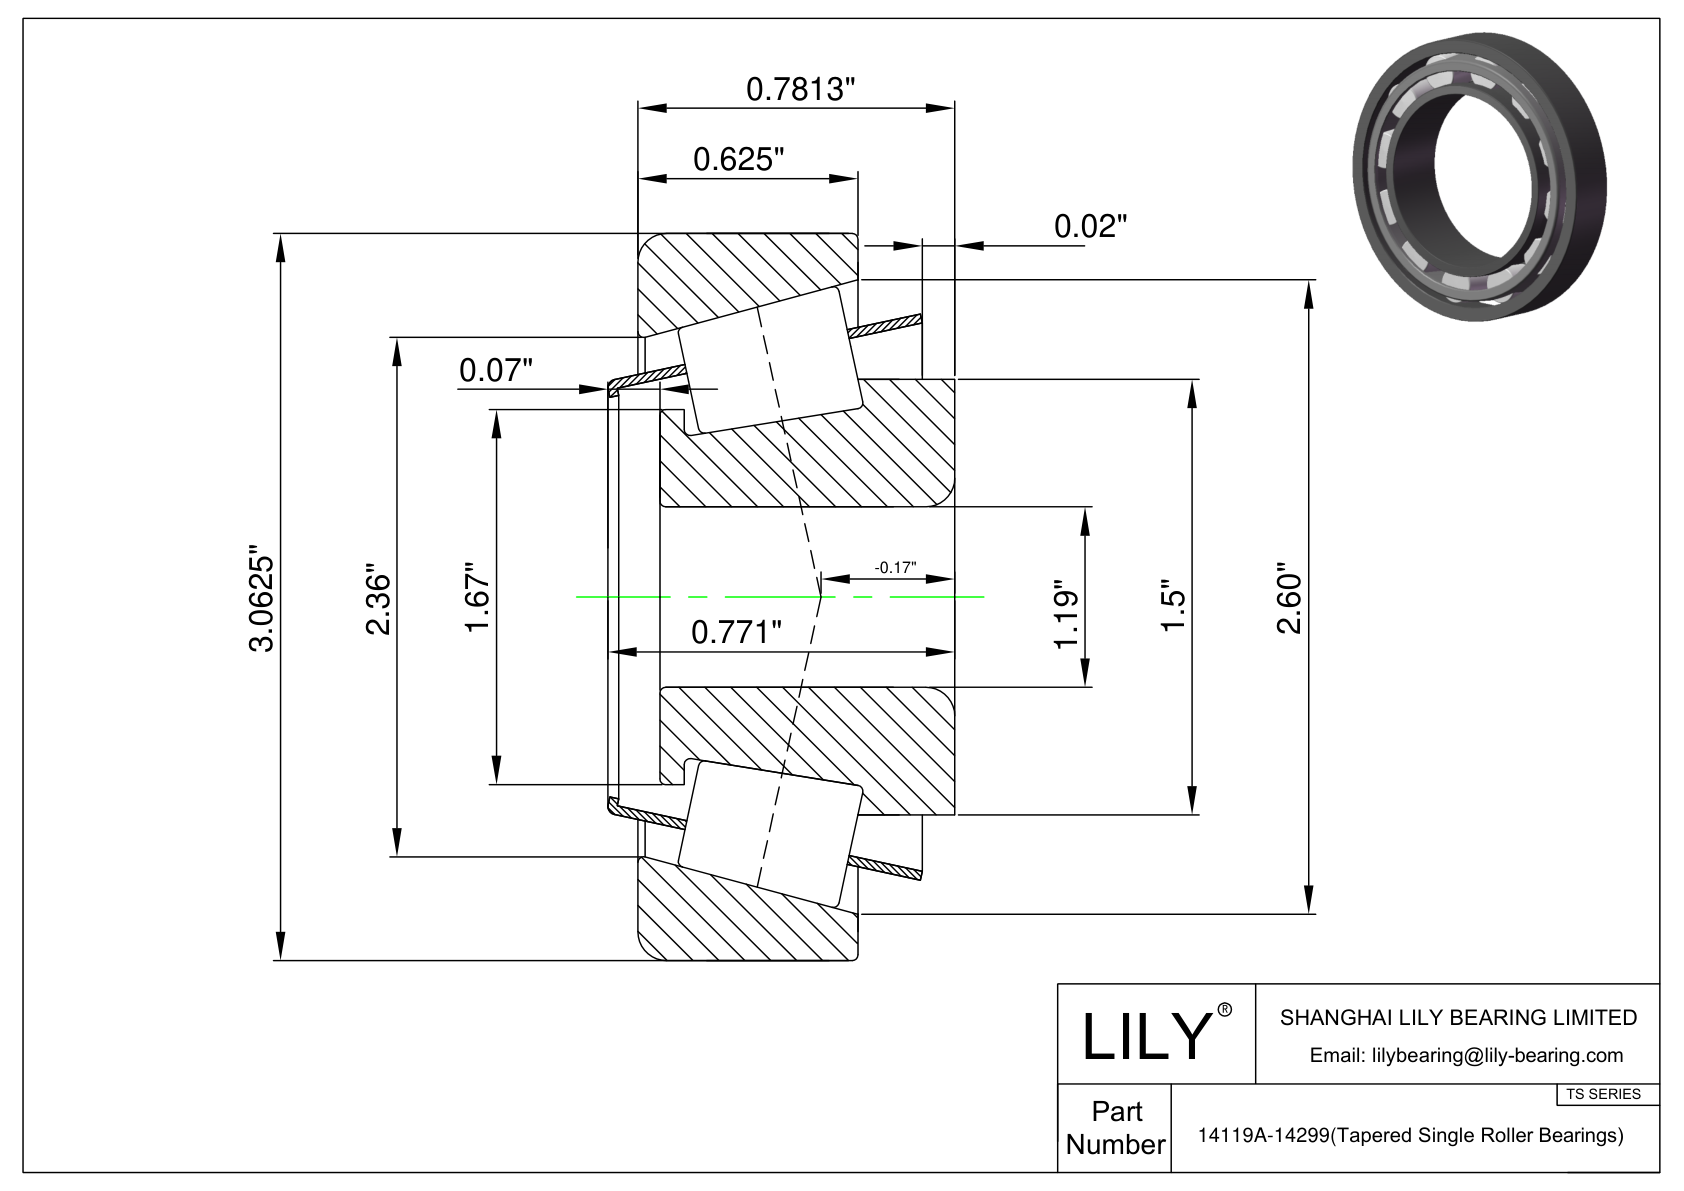 14119A-14284 TS (Tapered Single Roller Bearings) (Imperial) cad drawing